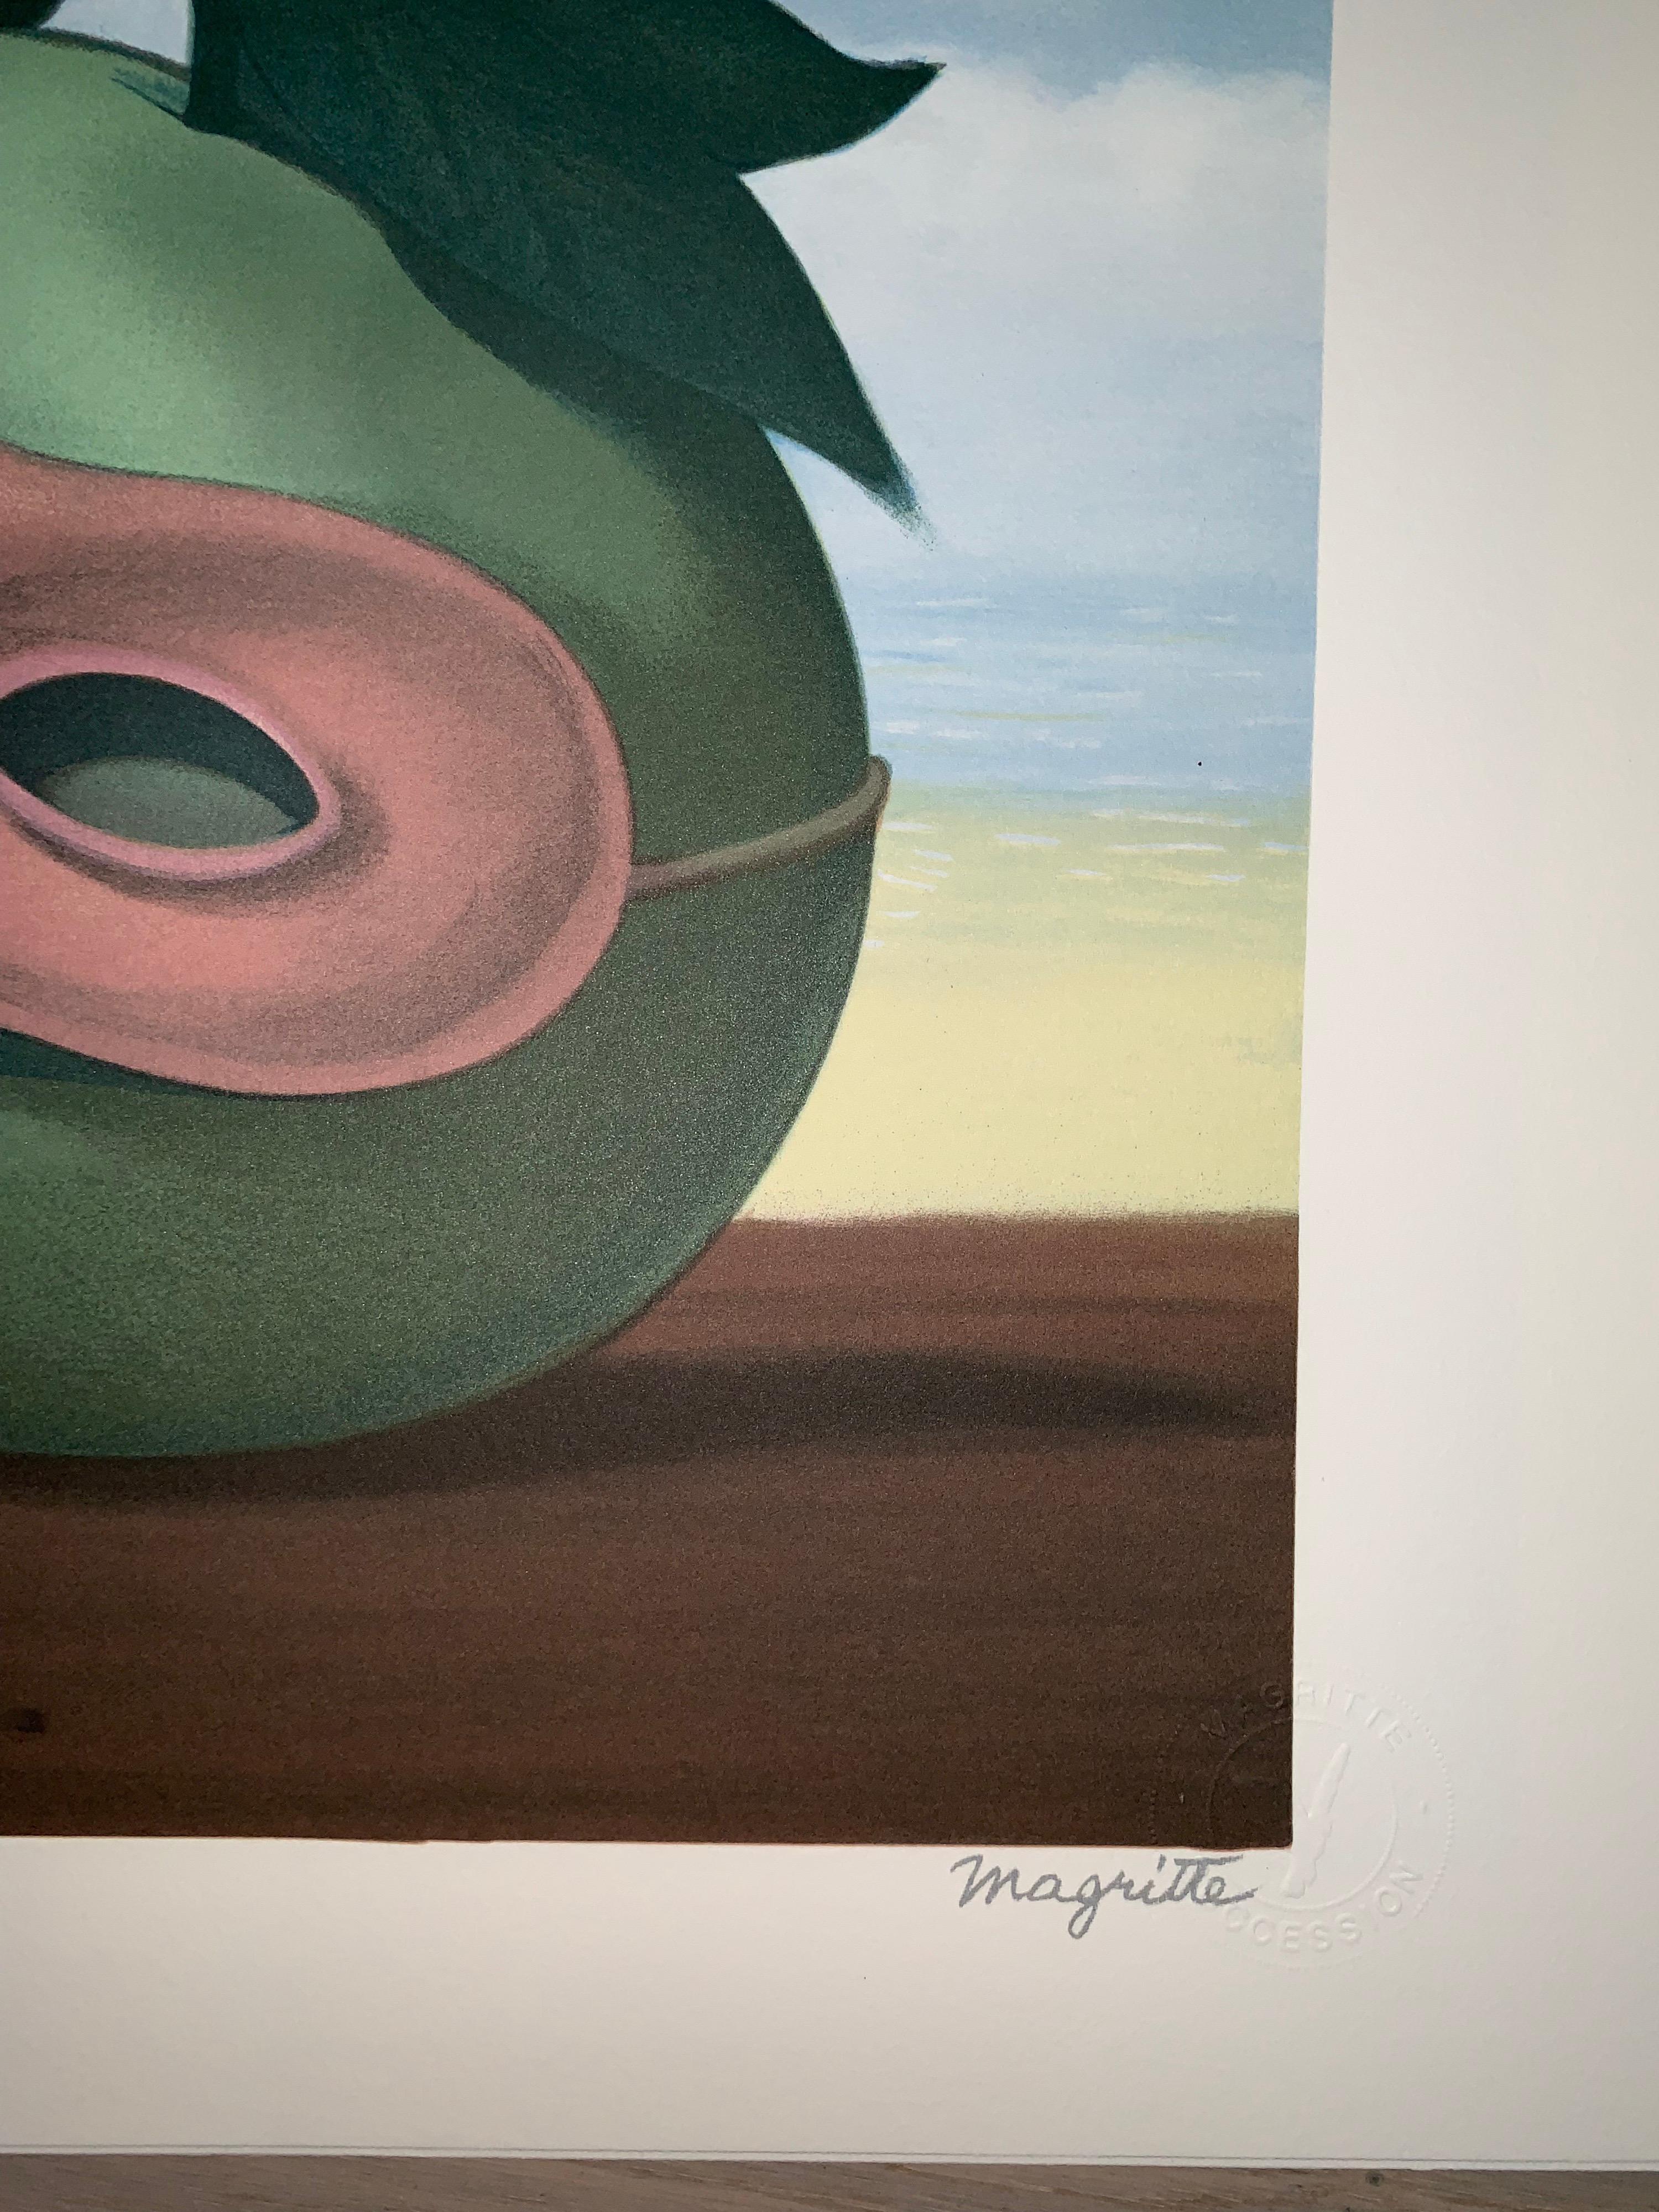 Numbered: 138/275
Color lithograph after the 1950 oil on canvas by René Magritte, printed signature of Magritte and numbered from the edition of 275. 
The lithograph features the dry stamps of the Magritte Foundation & ADAGP and is countersigned in